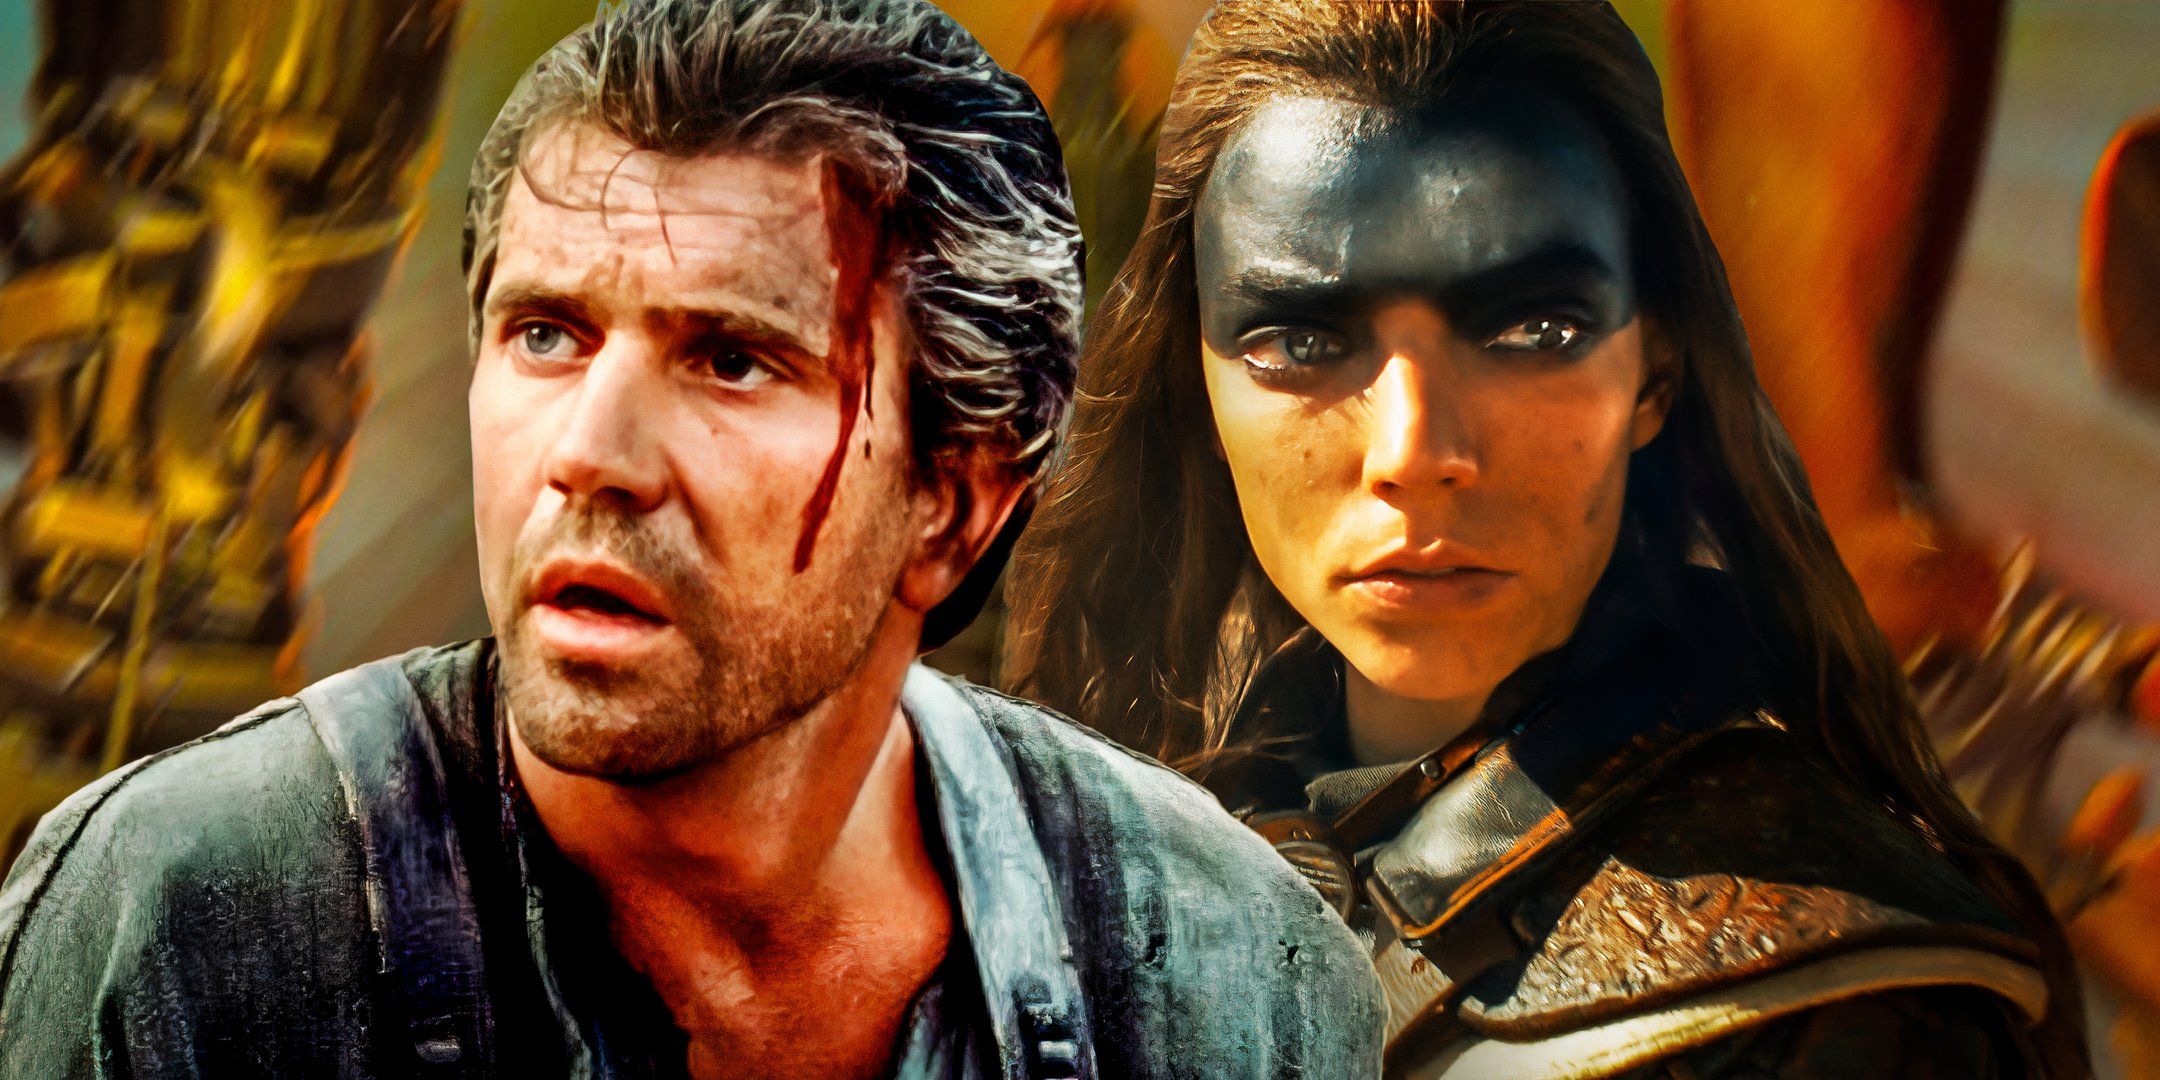 Mel Gibson as Mad Max and Anya Taylor-Joy as Furiosa in the franchise